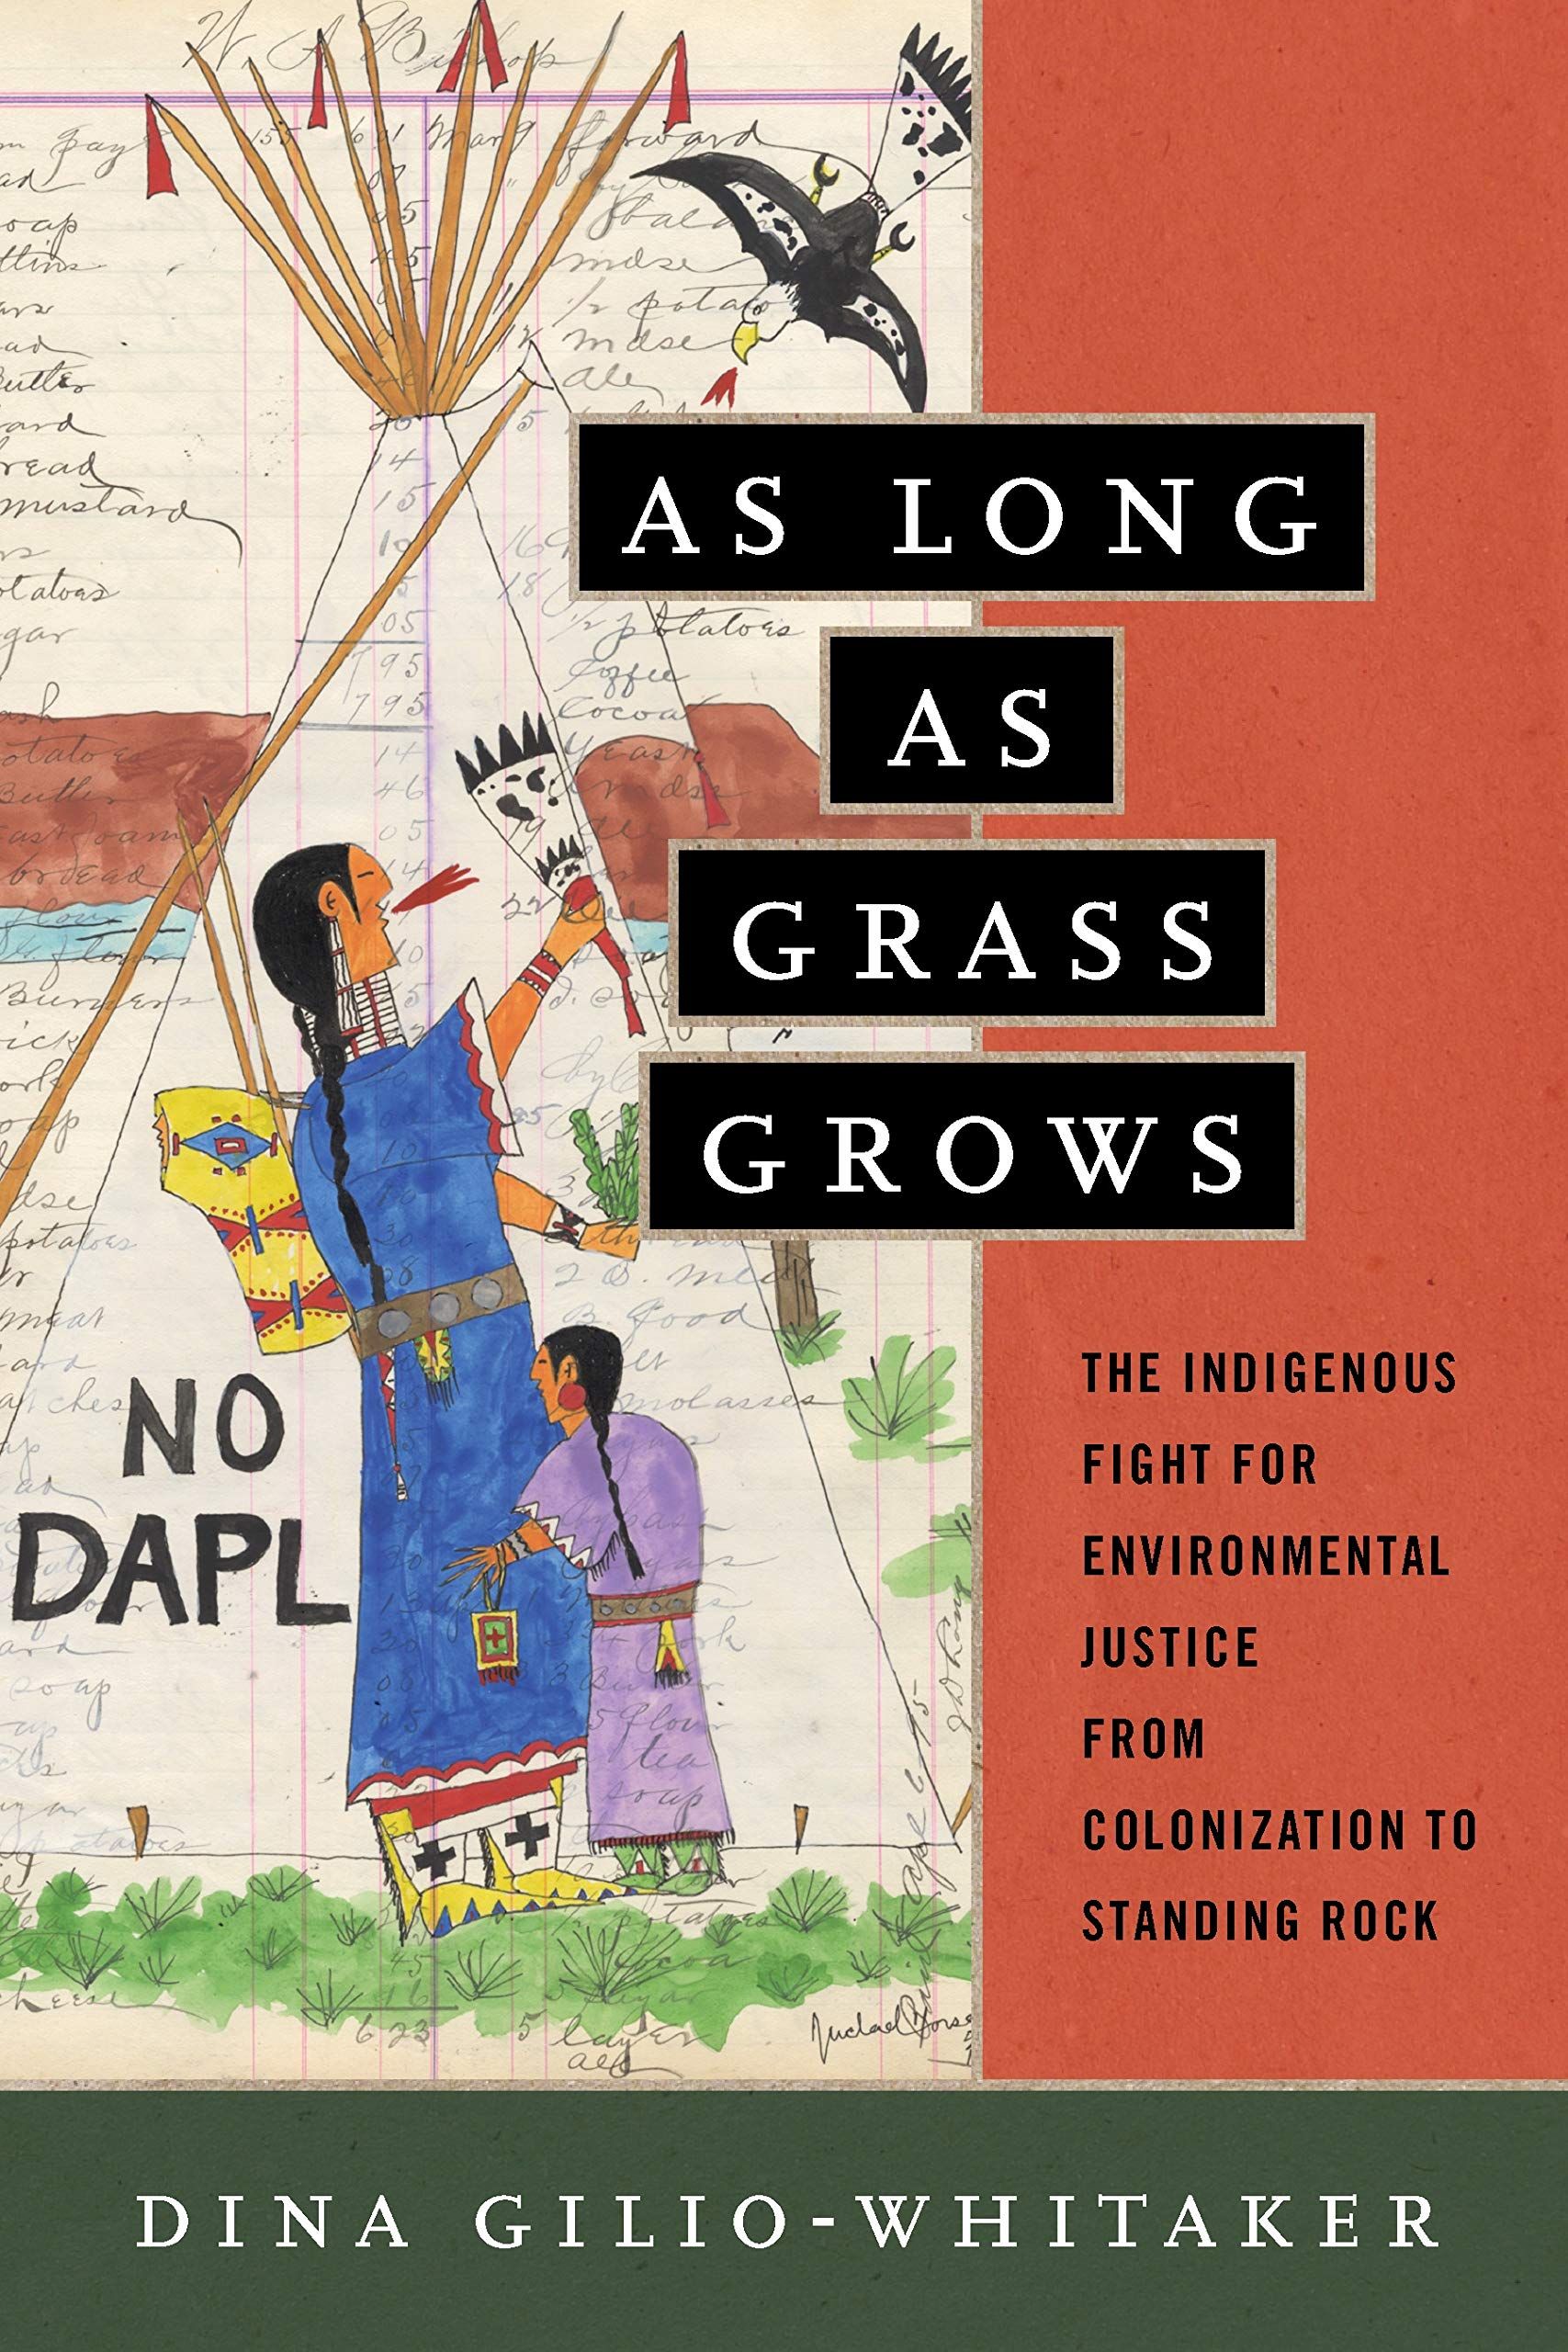 Cover of As Long as the Grass Grows by Dina Gilio-Whitaker